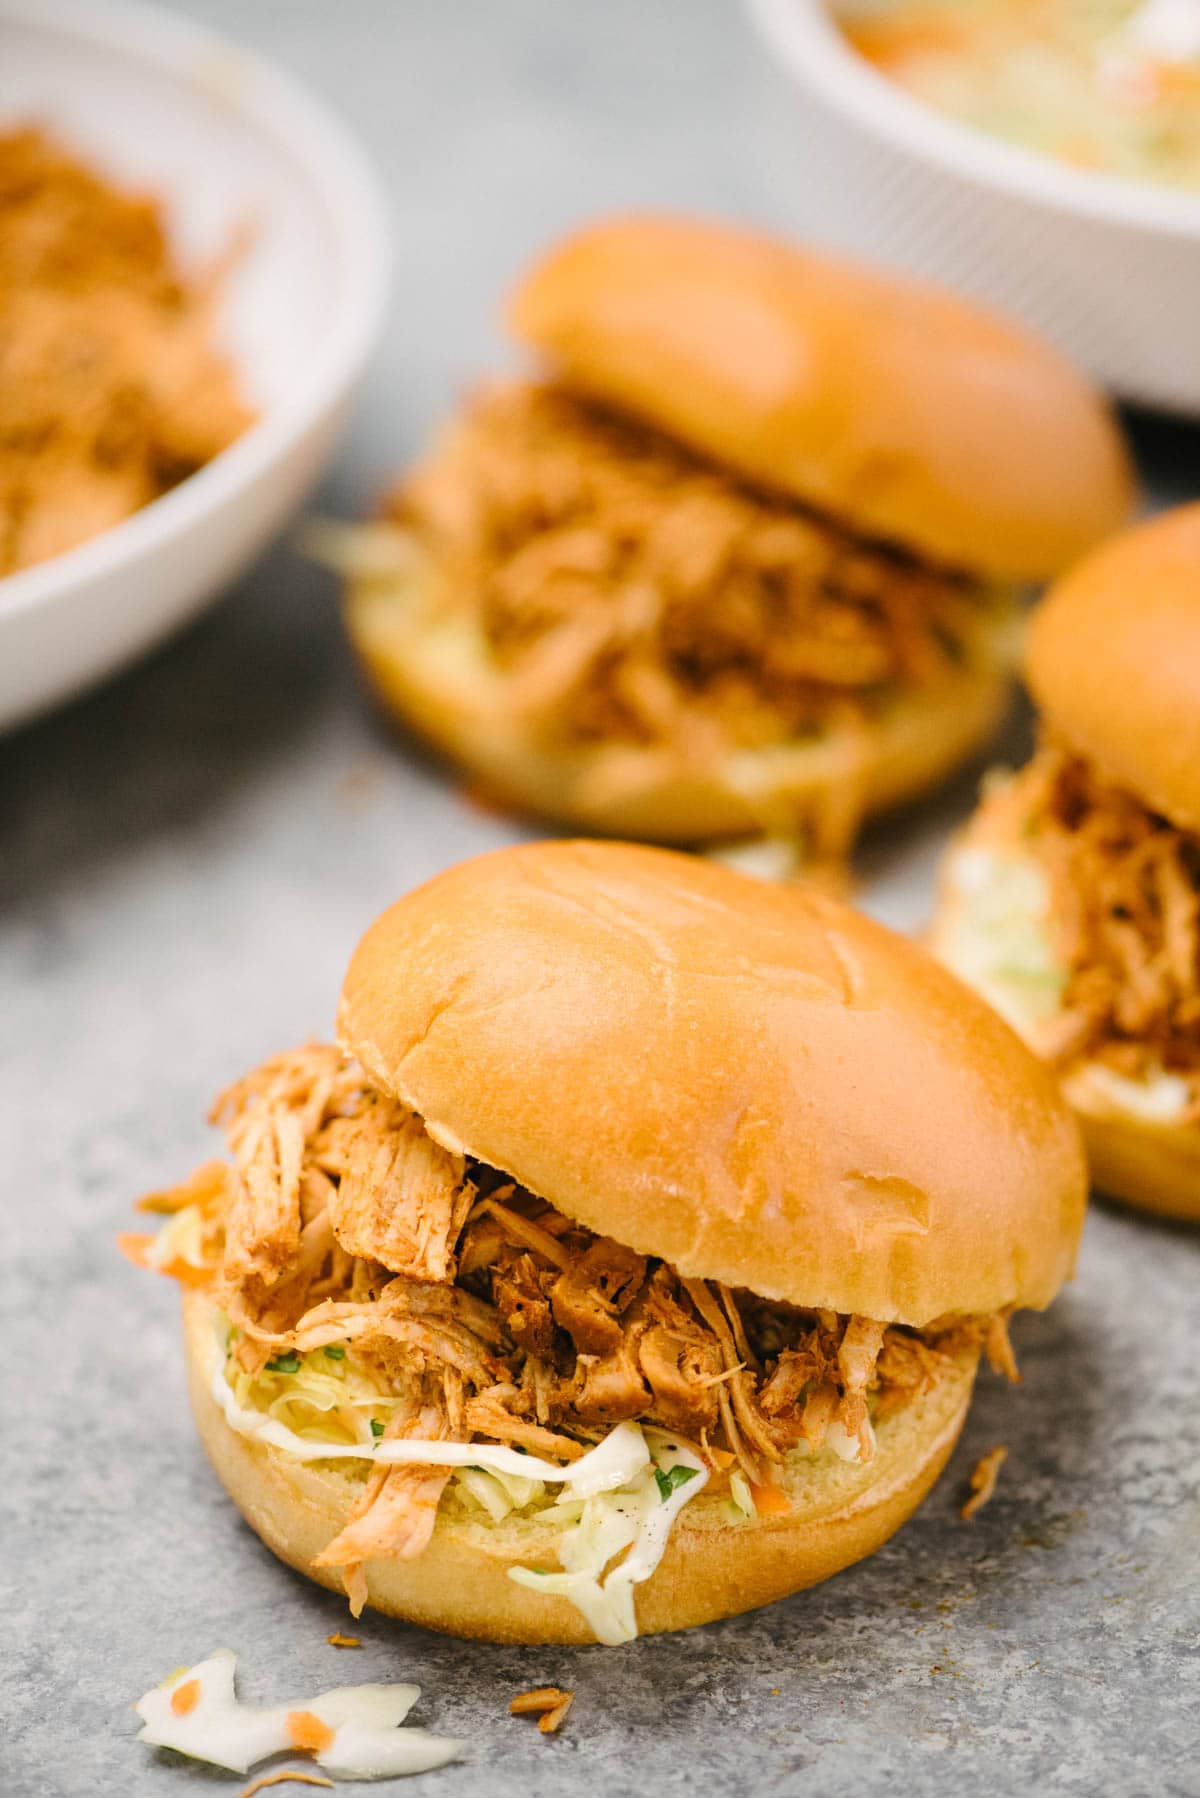 Side view, three pulled pork sandwiches with coleslaw on brioche buns; bowls of pulled pork and coleslaw are in the background.